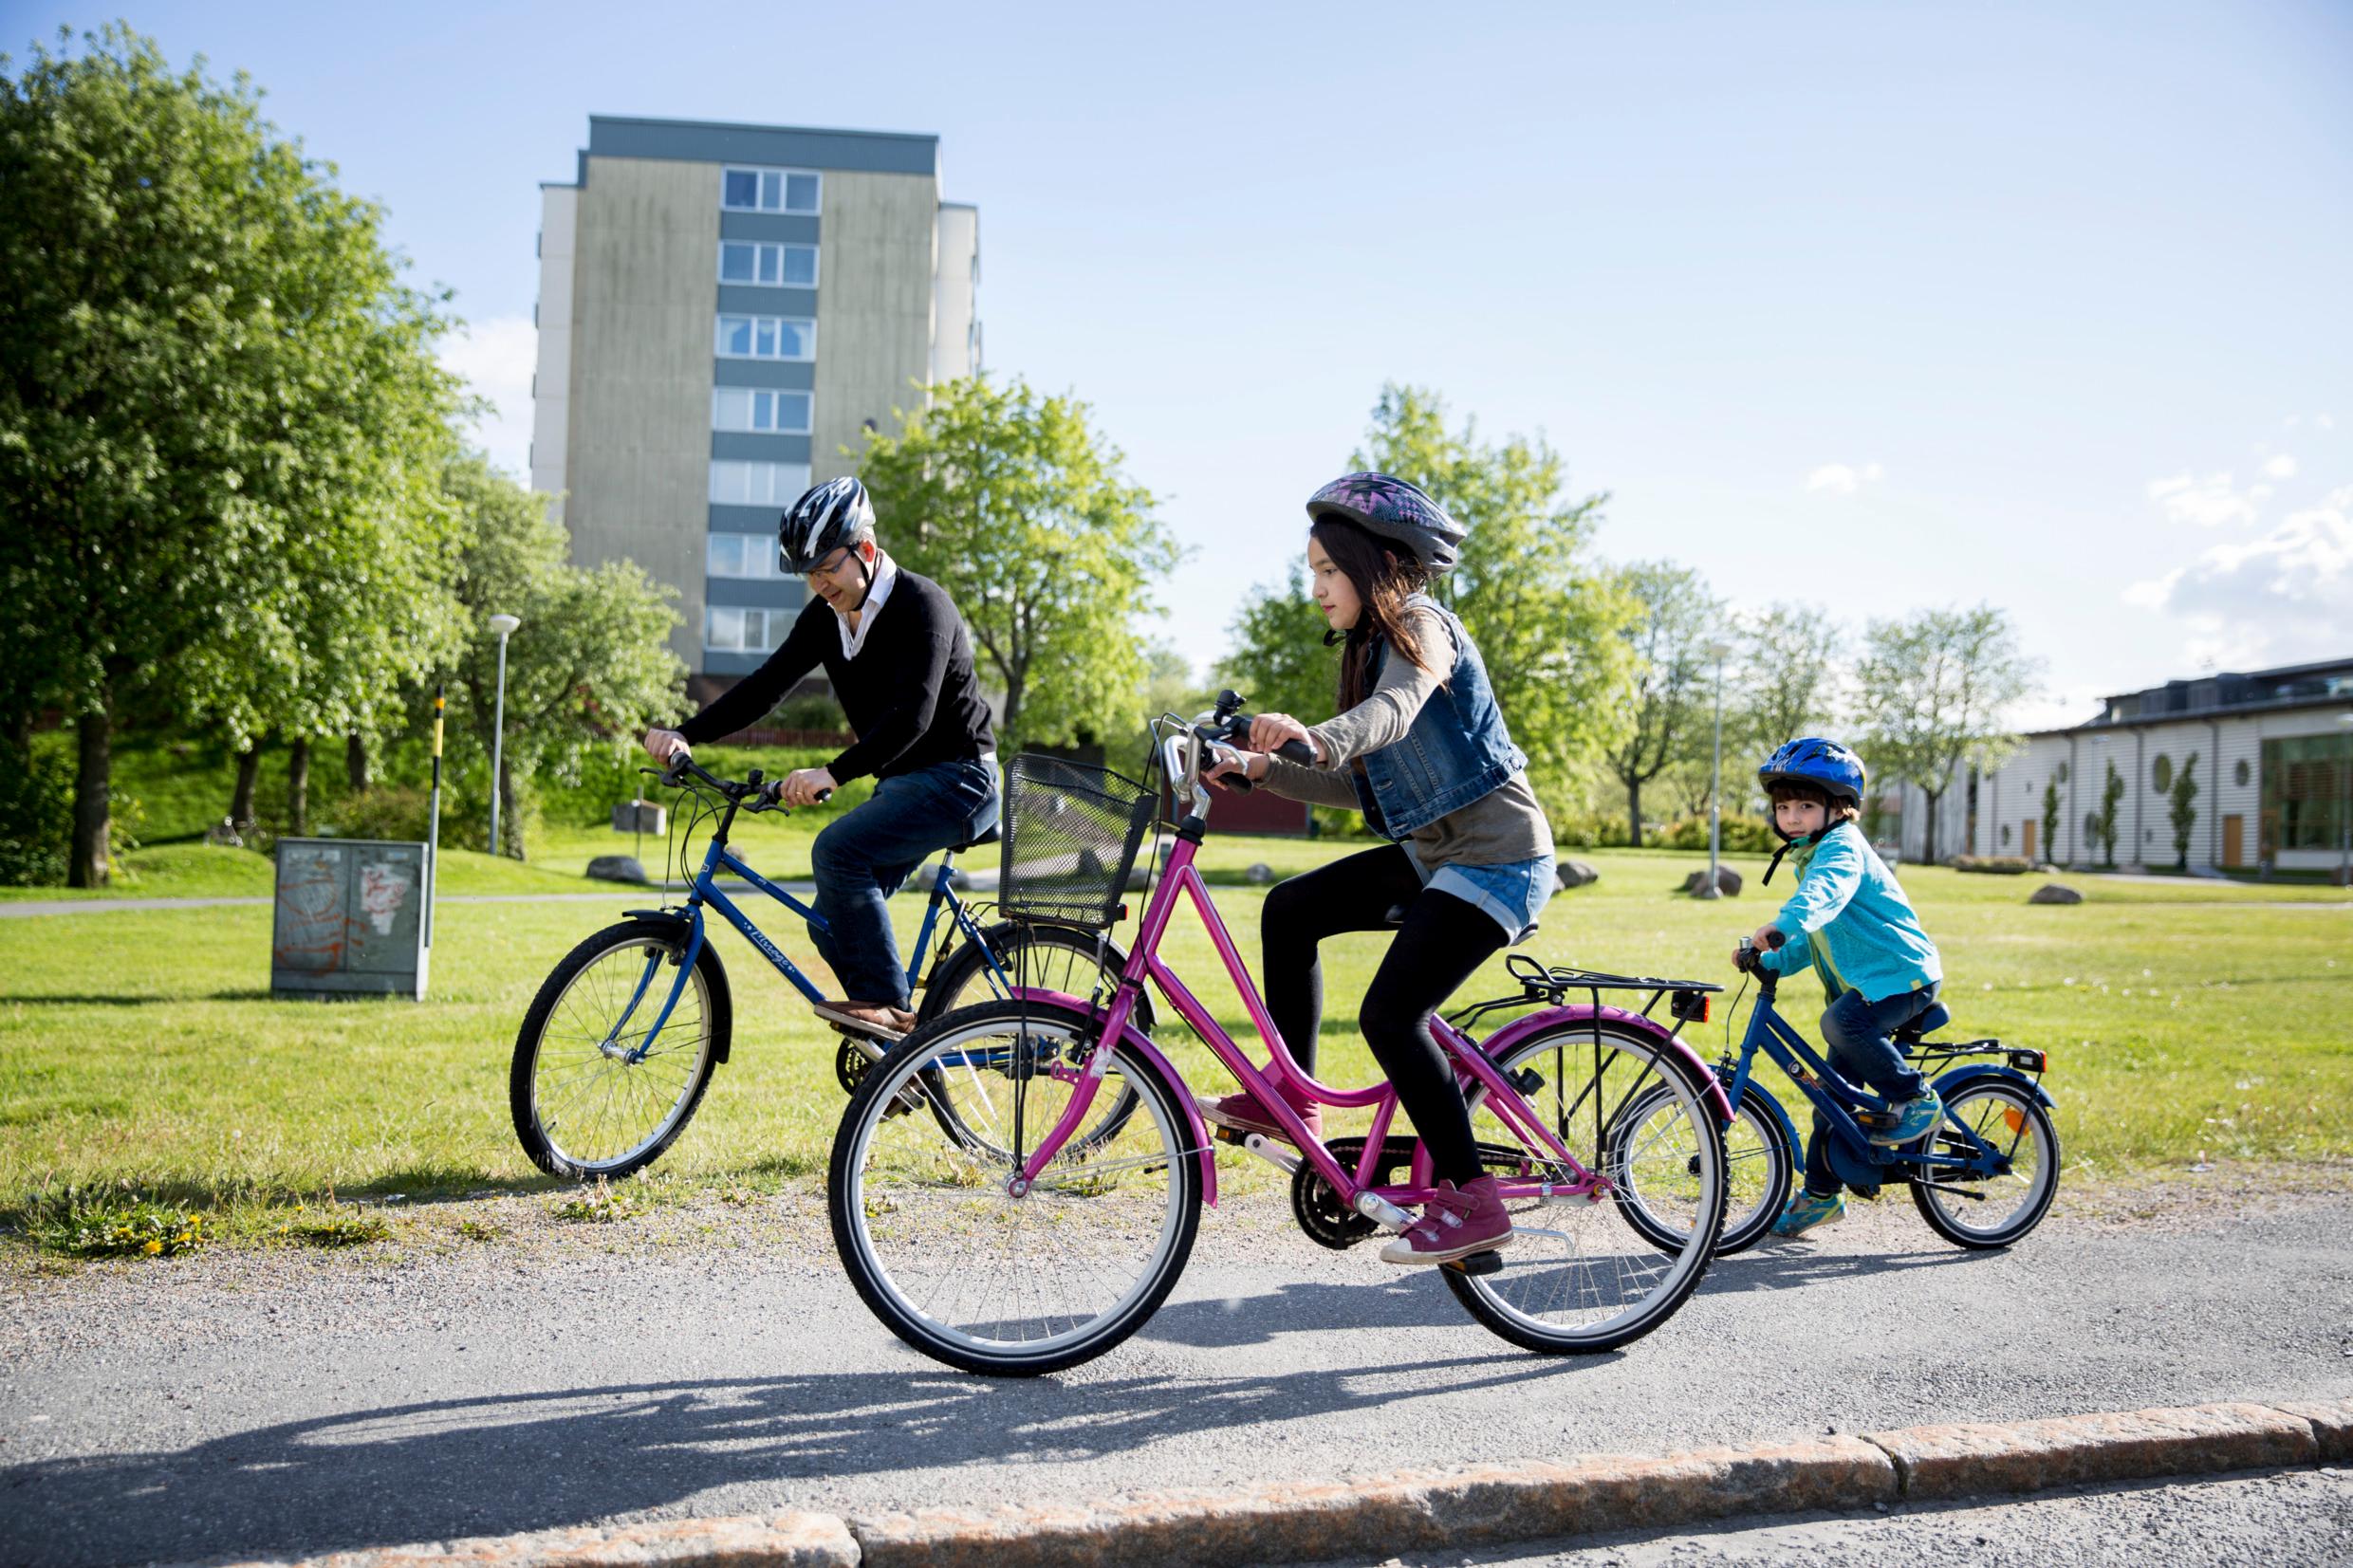 A father and two children cykling on a cycle path next to a grassy area.